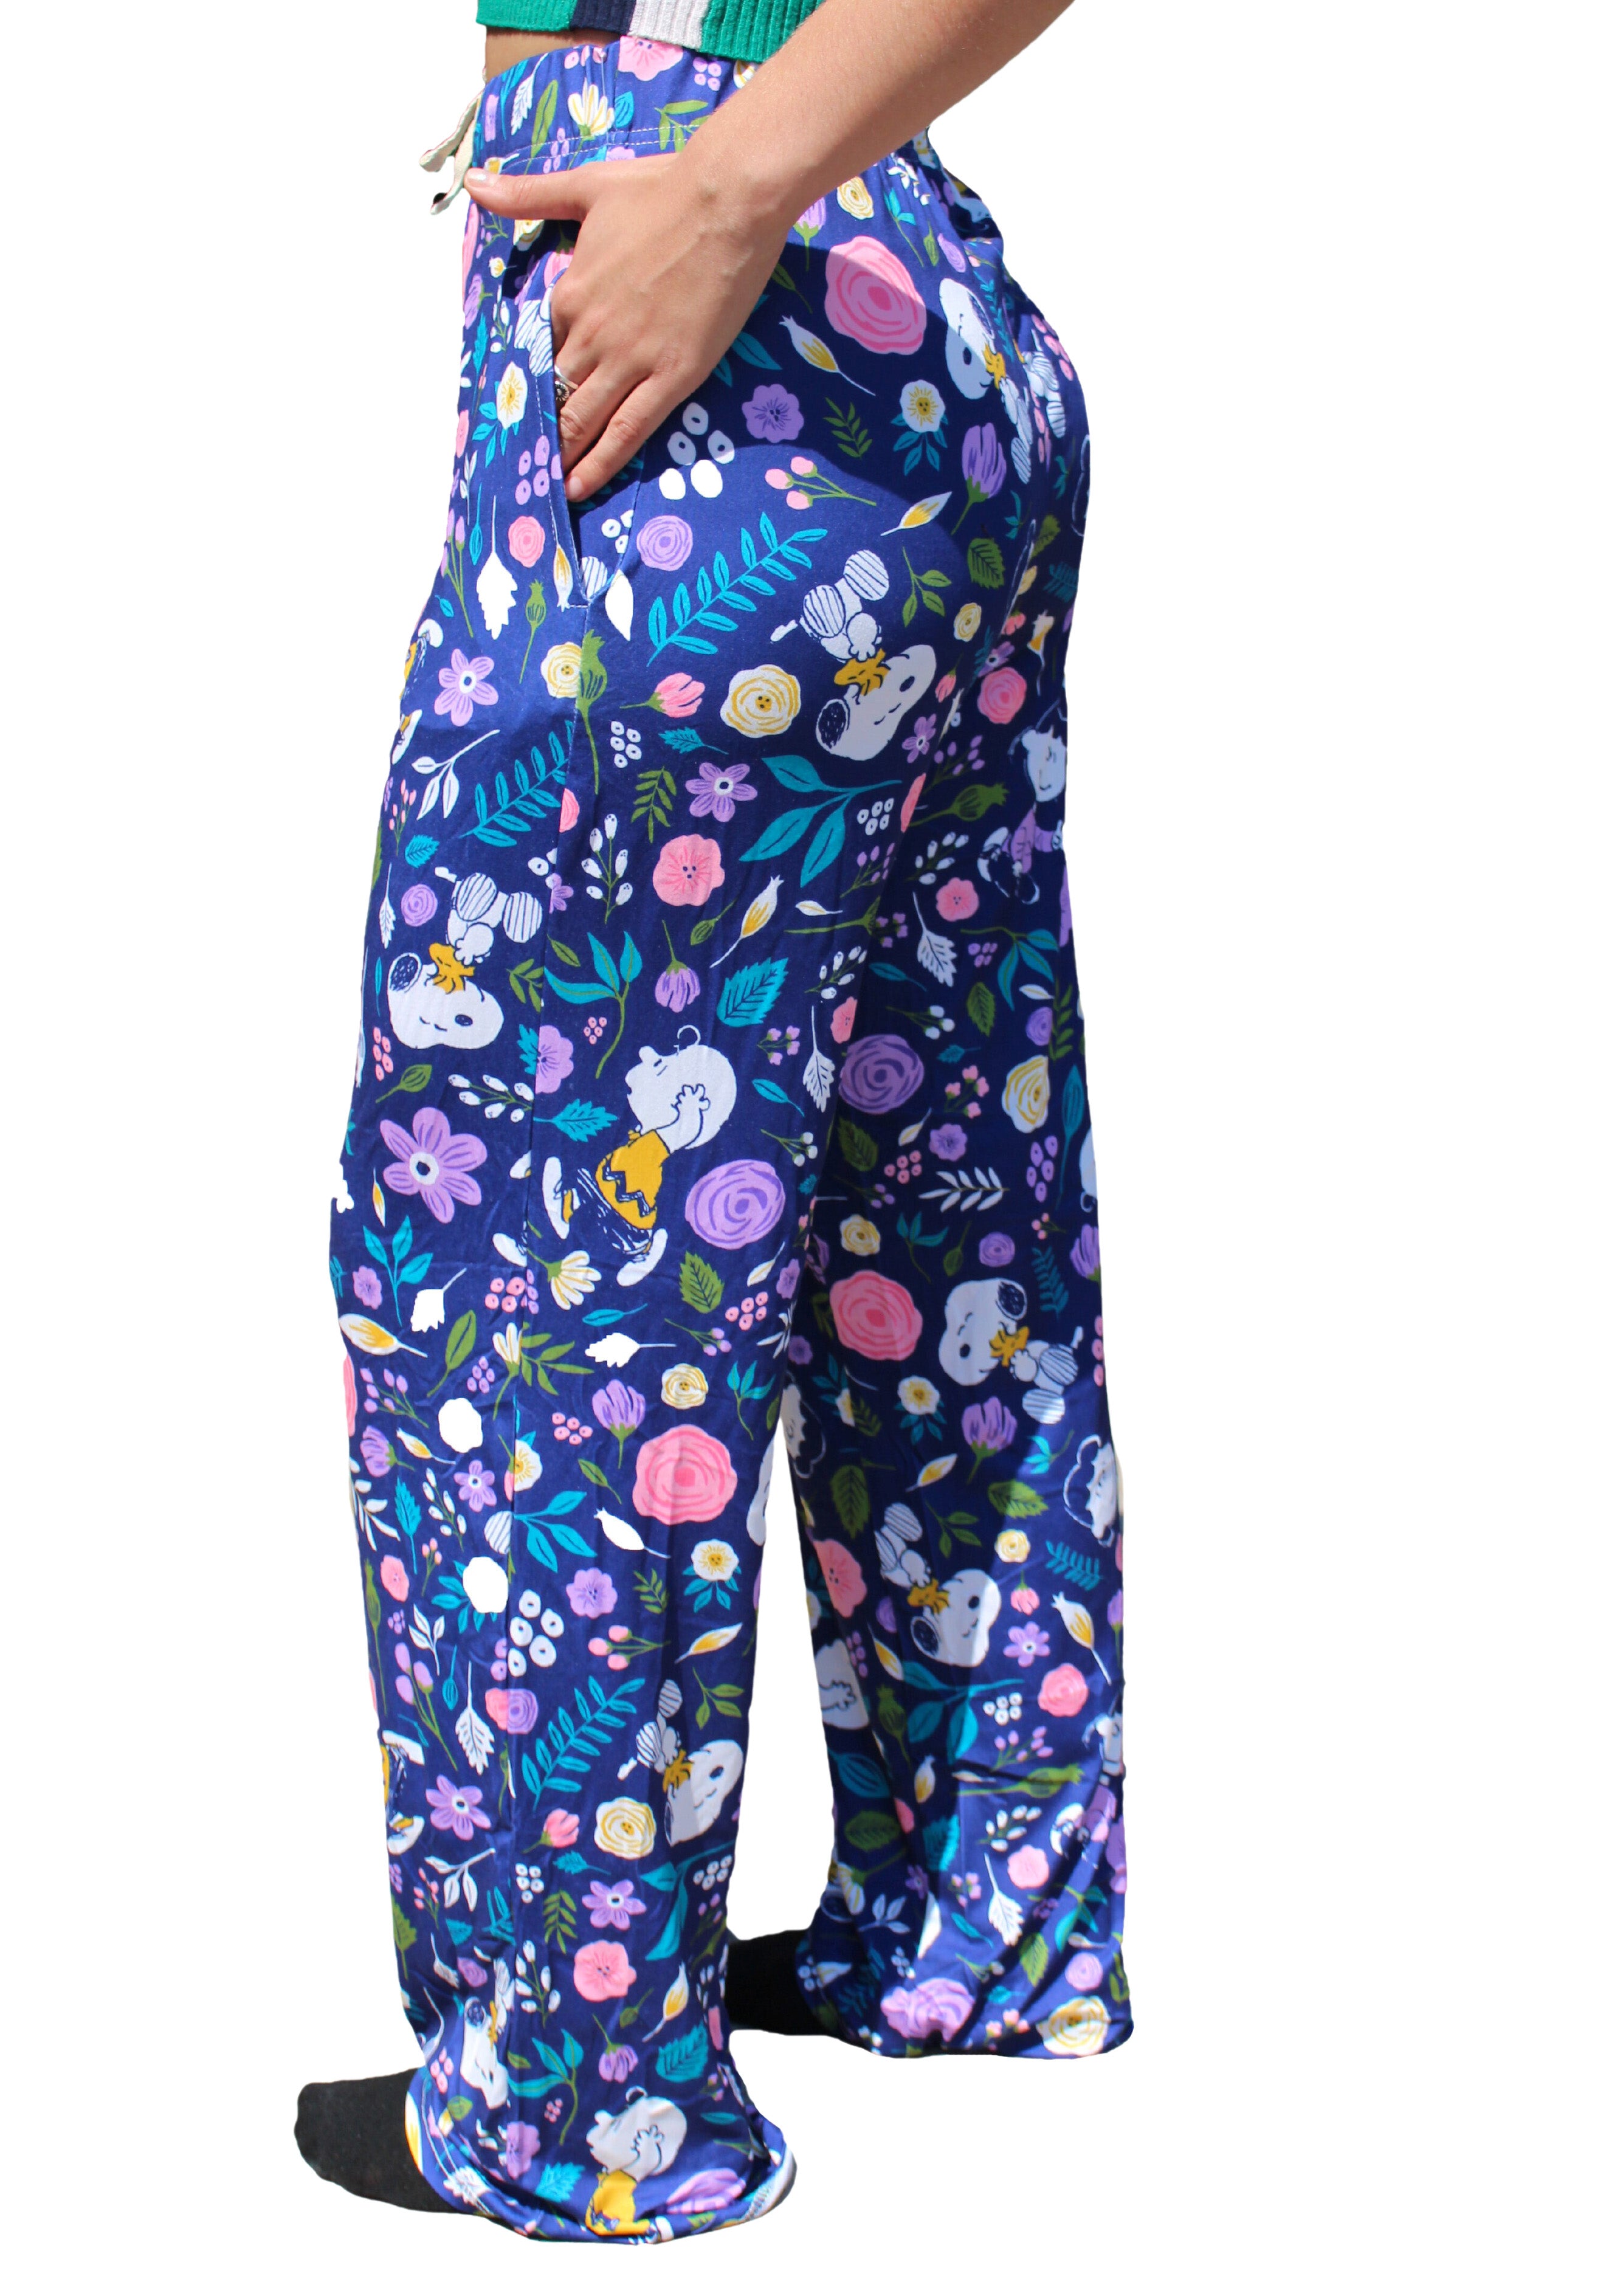 Snoopy Floral Love pajama lounge pants on model left side view